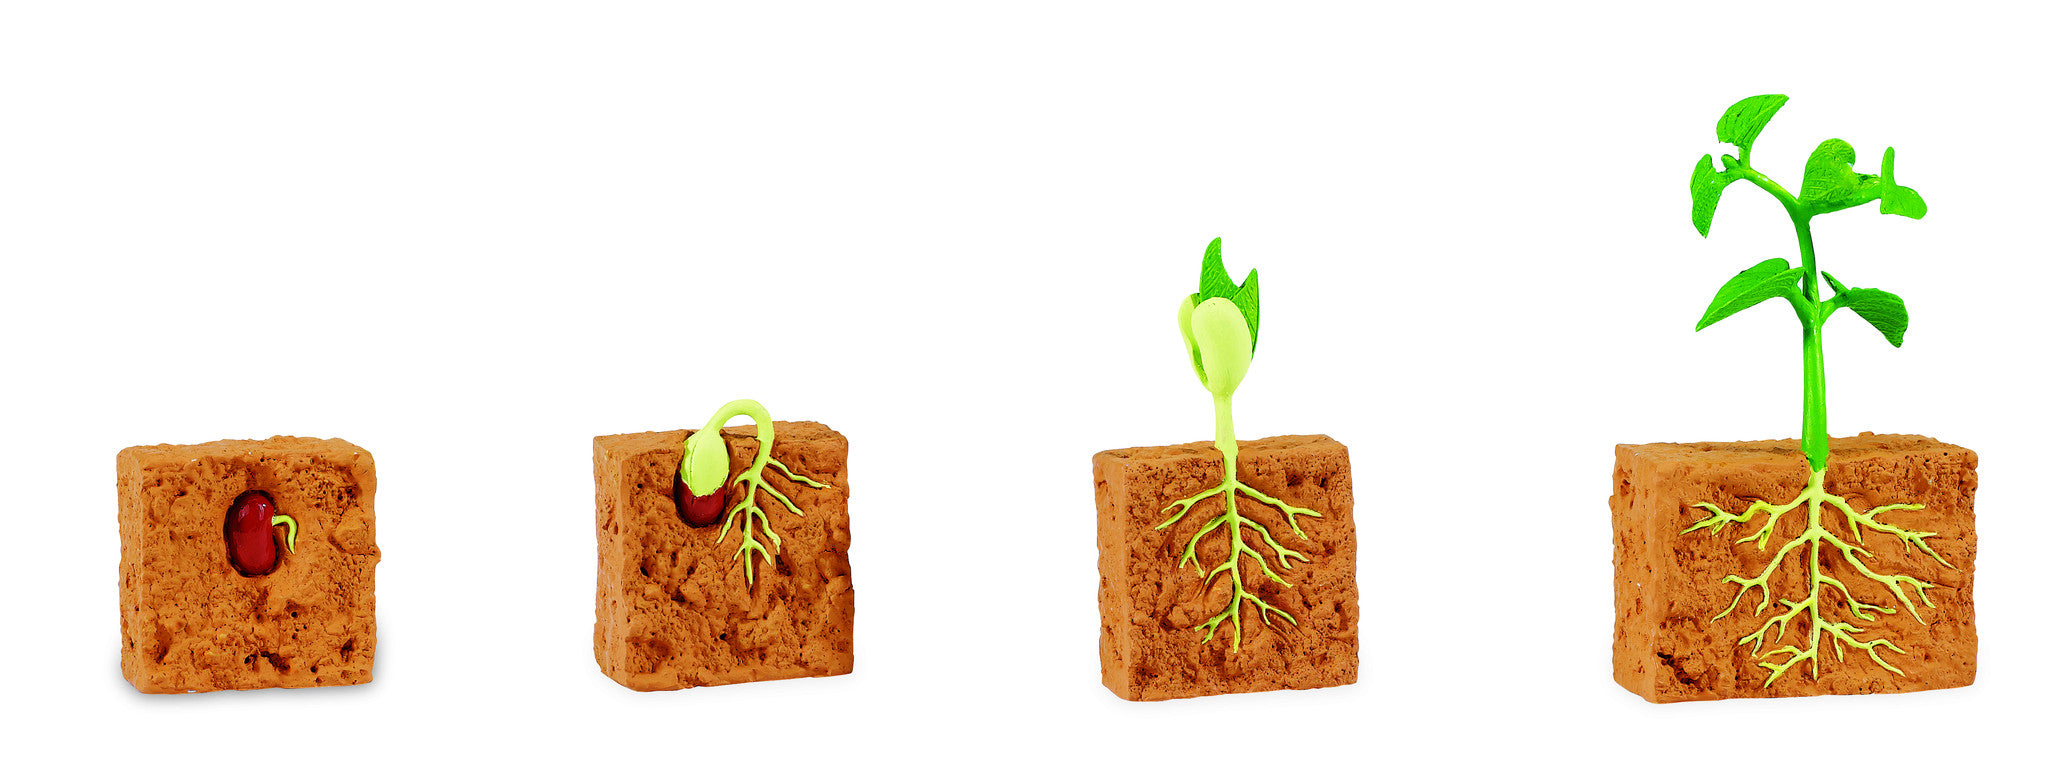 bean-plant-life-cycle-models-3-part-cards-montessori-child